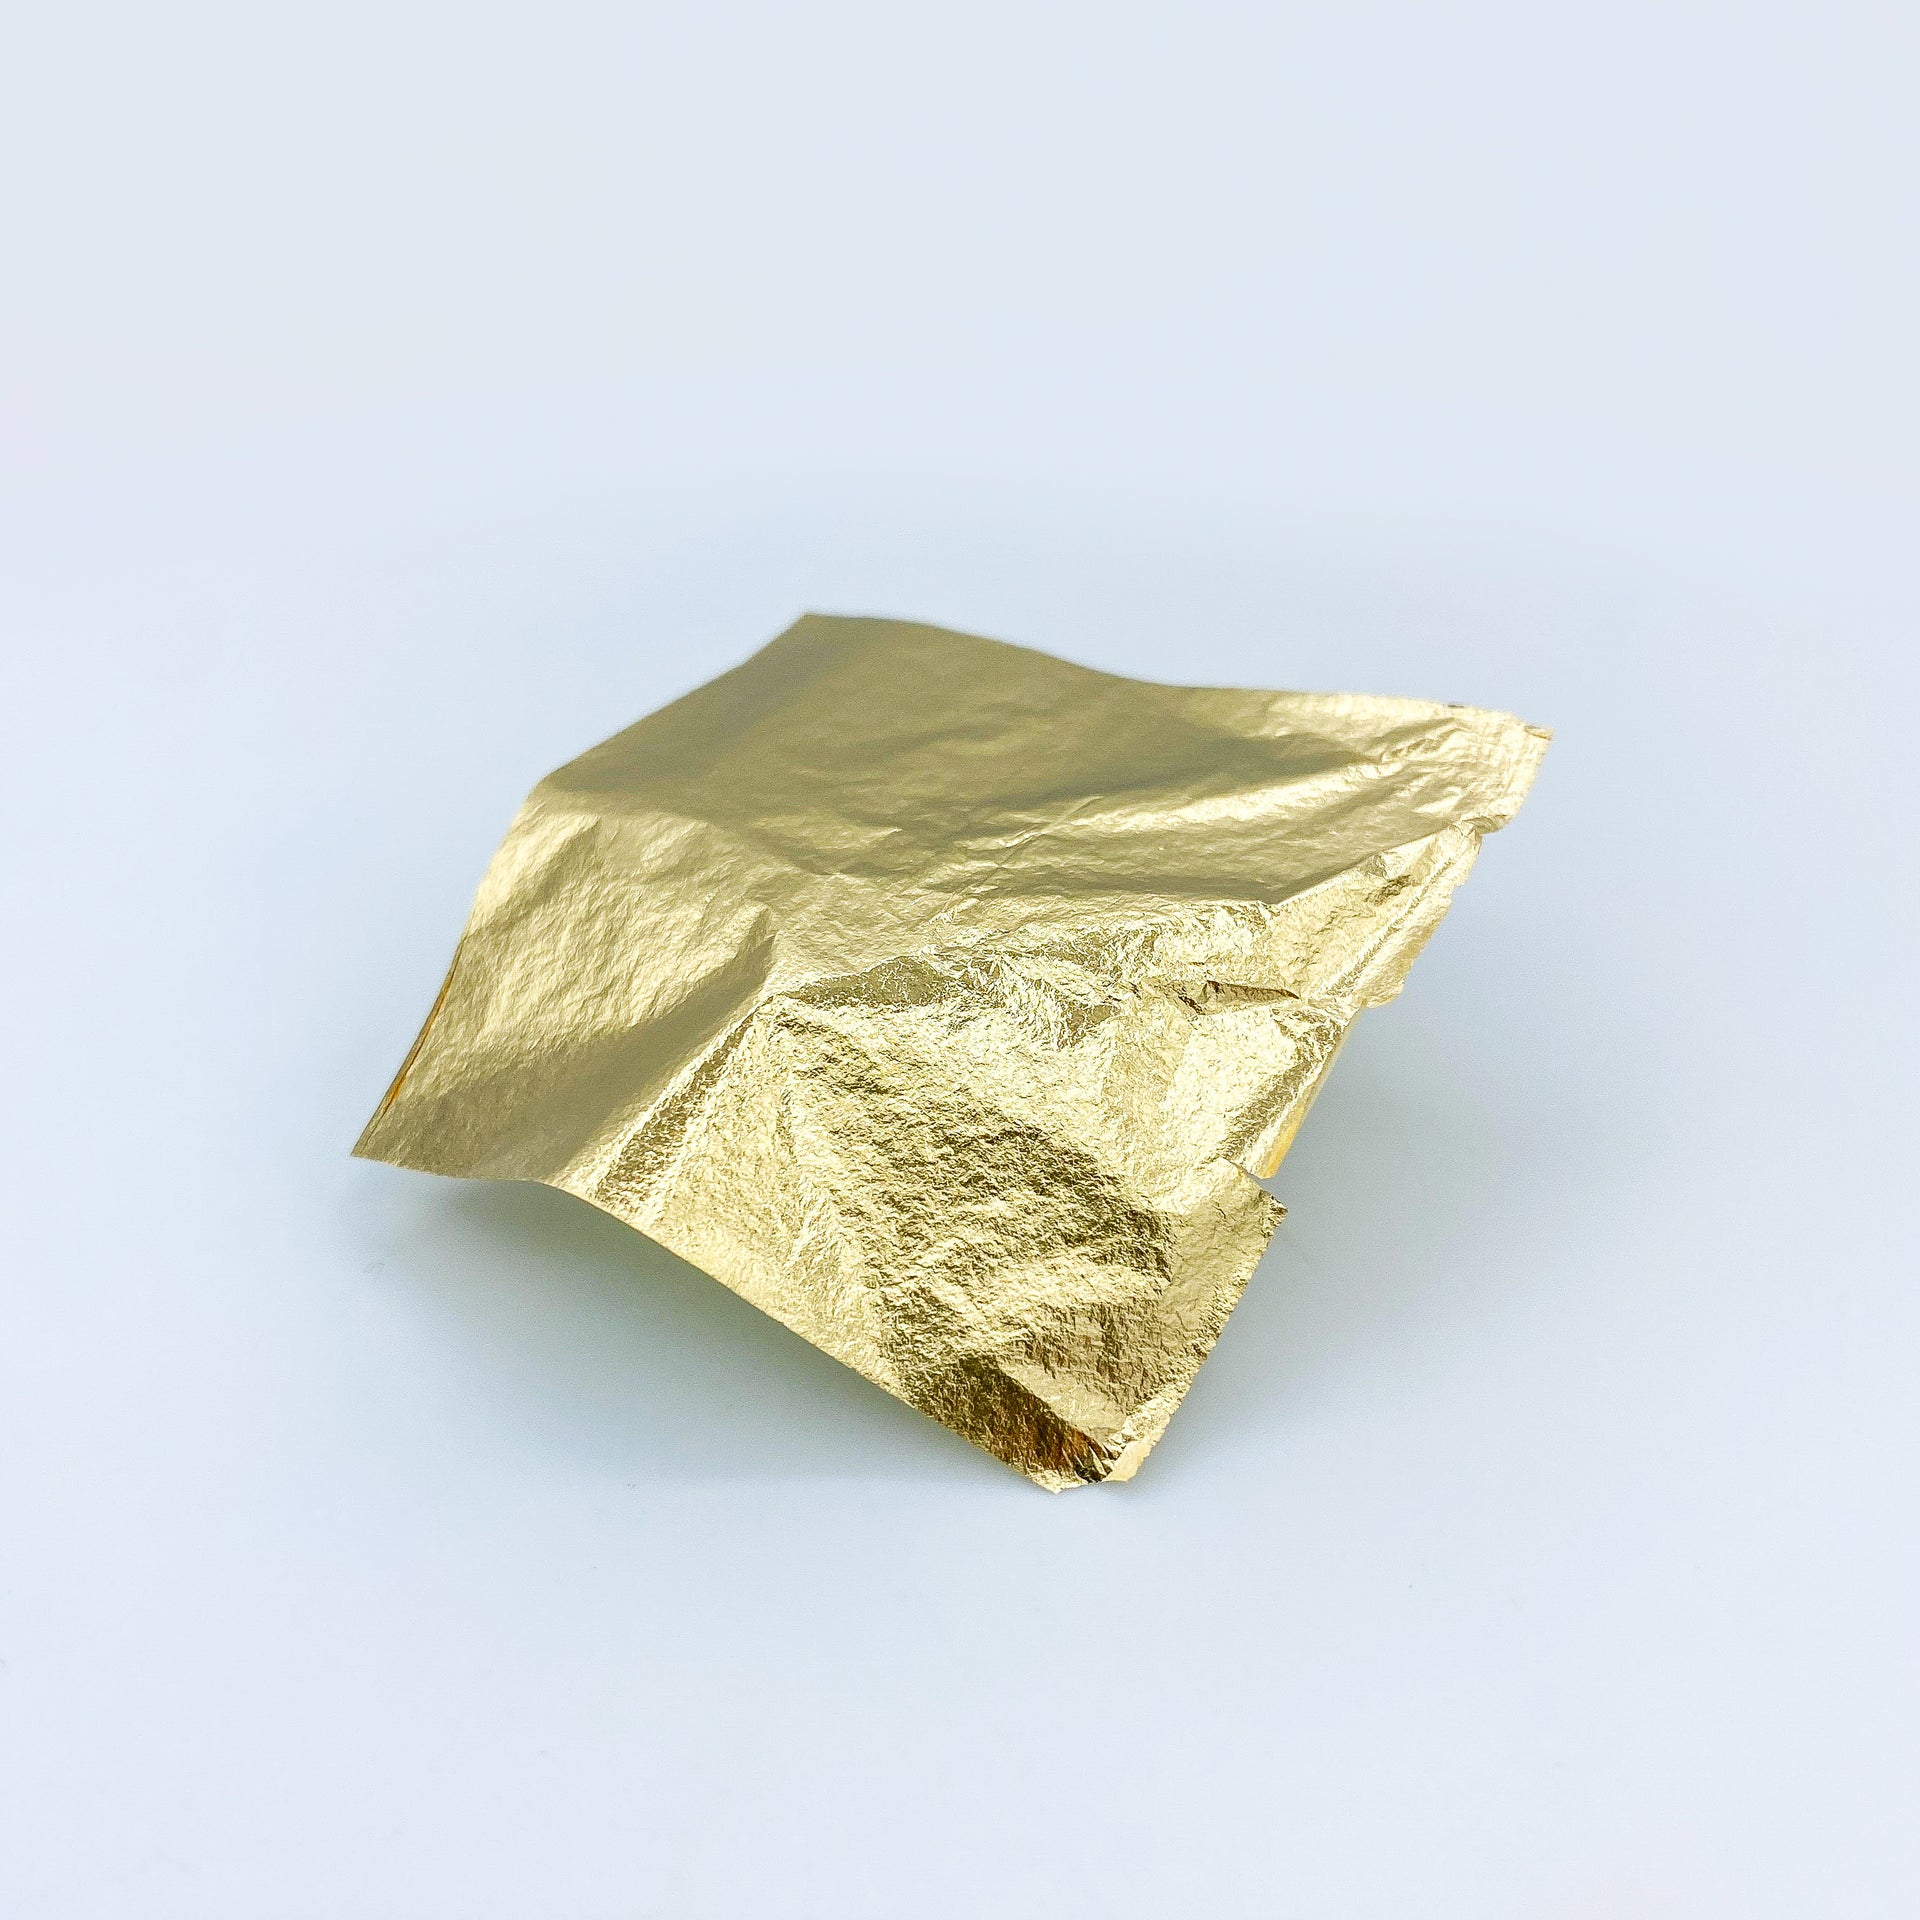 Gold Leaf Flakes - Cllam Supply